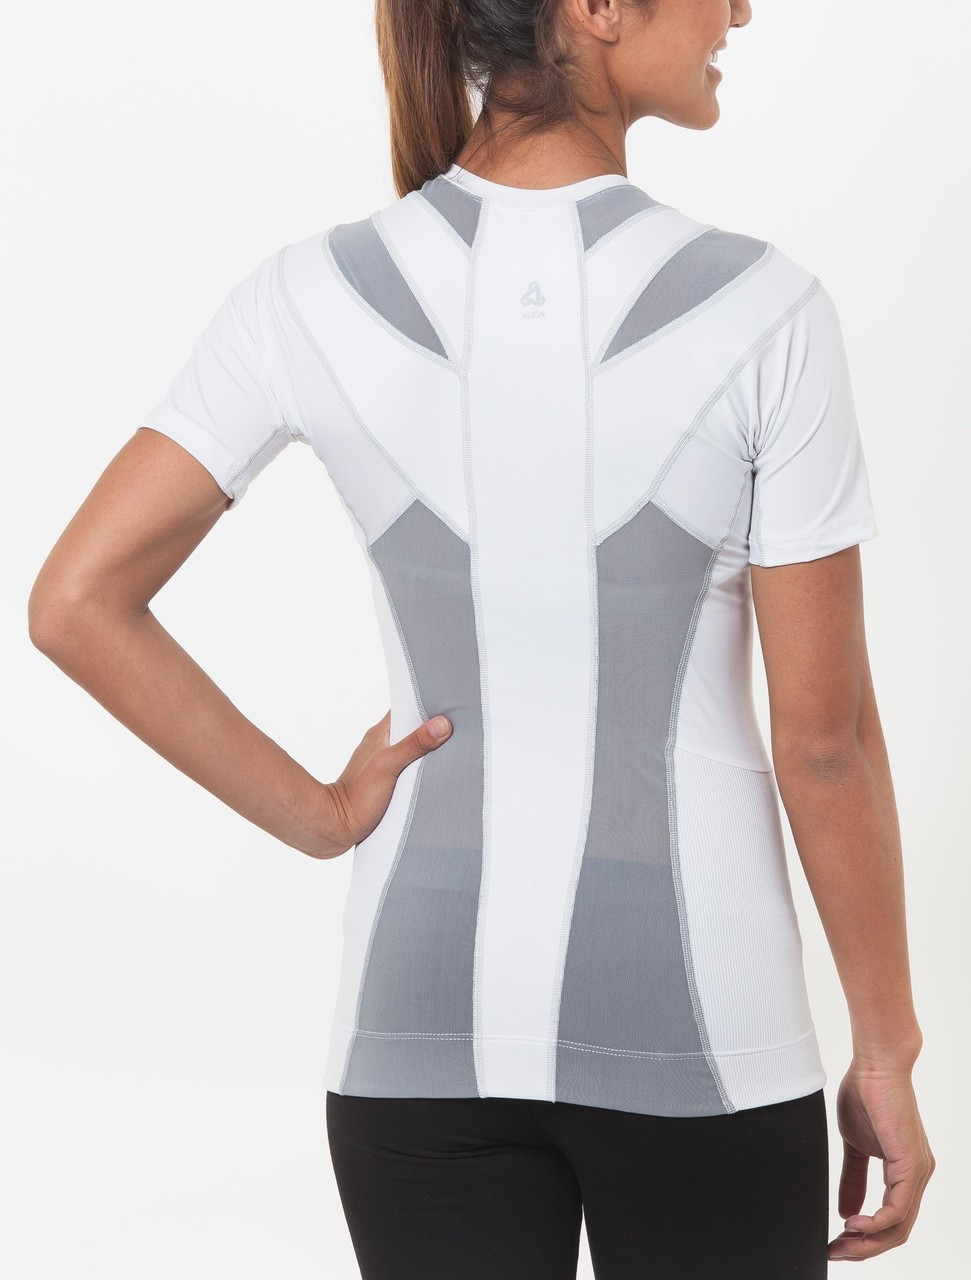 Tops, 2 Alignmed Posture Shirts